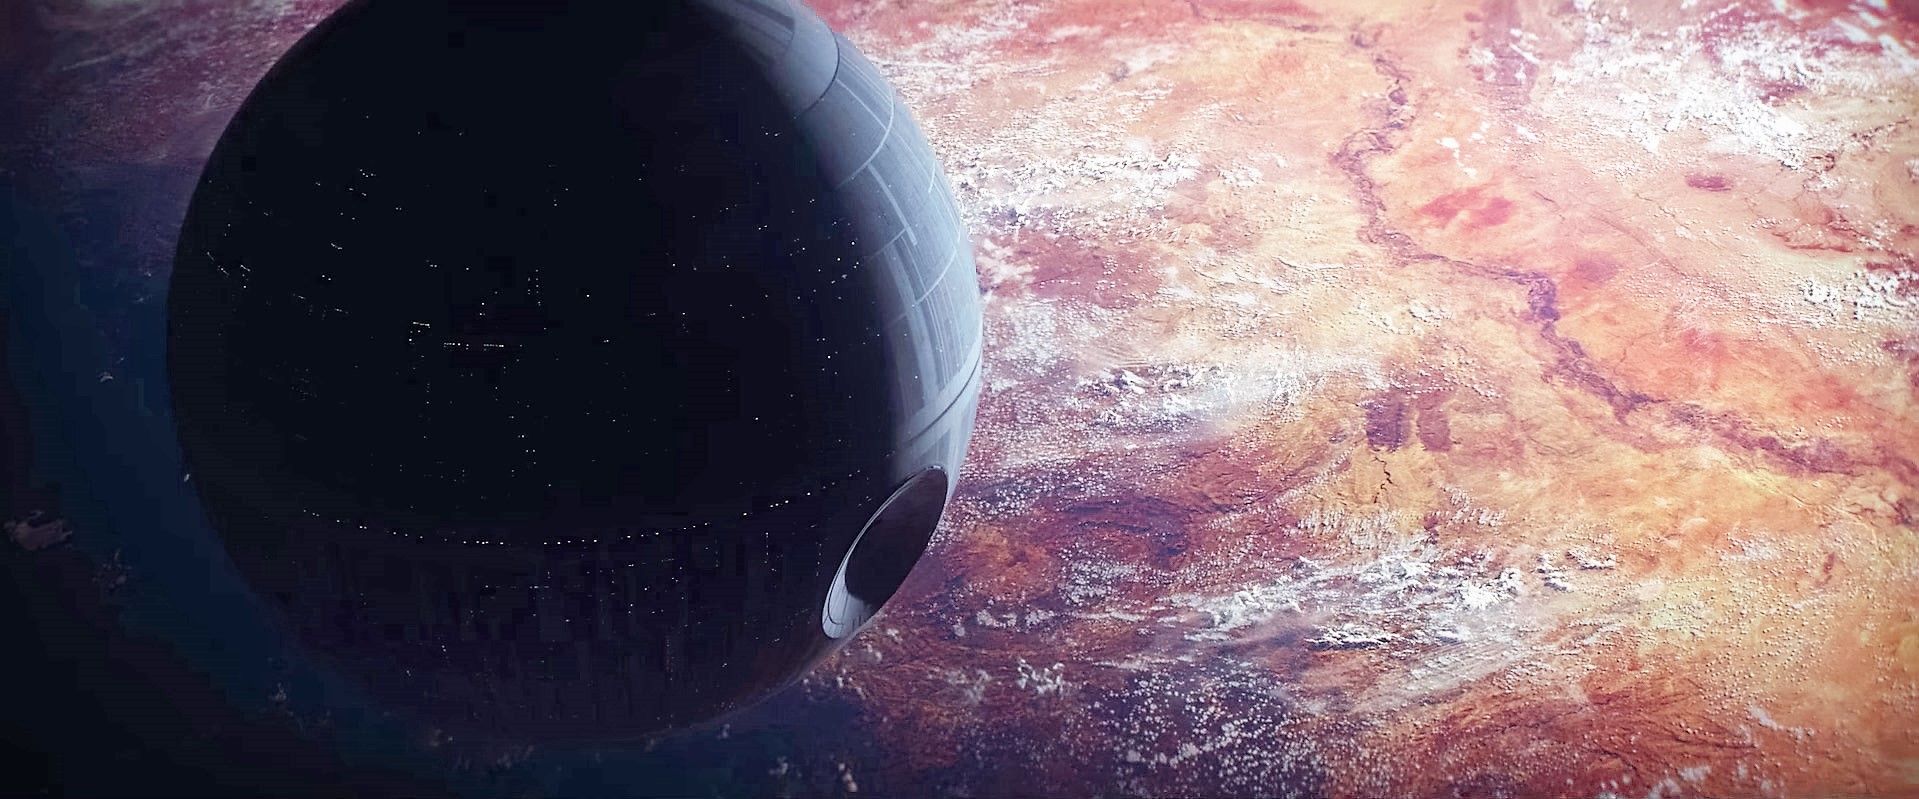 9 Big Rogue One Questions The New Star Wars Trailer Is Forcing Us To Ask